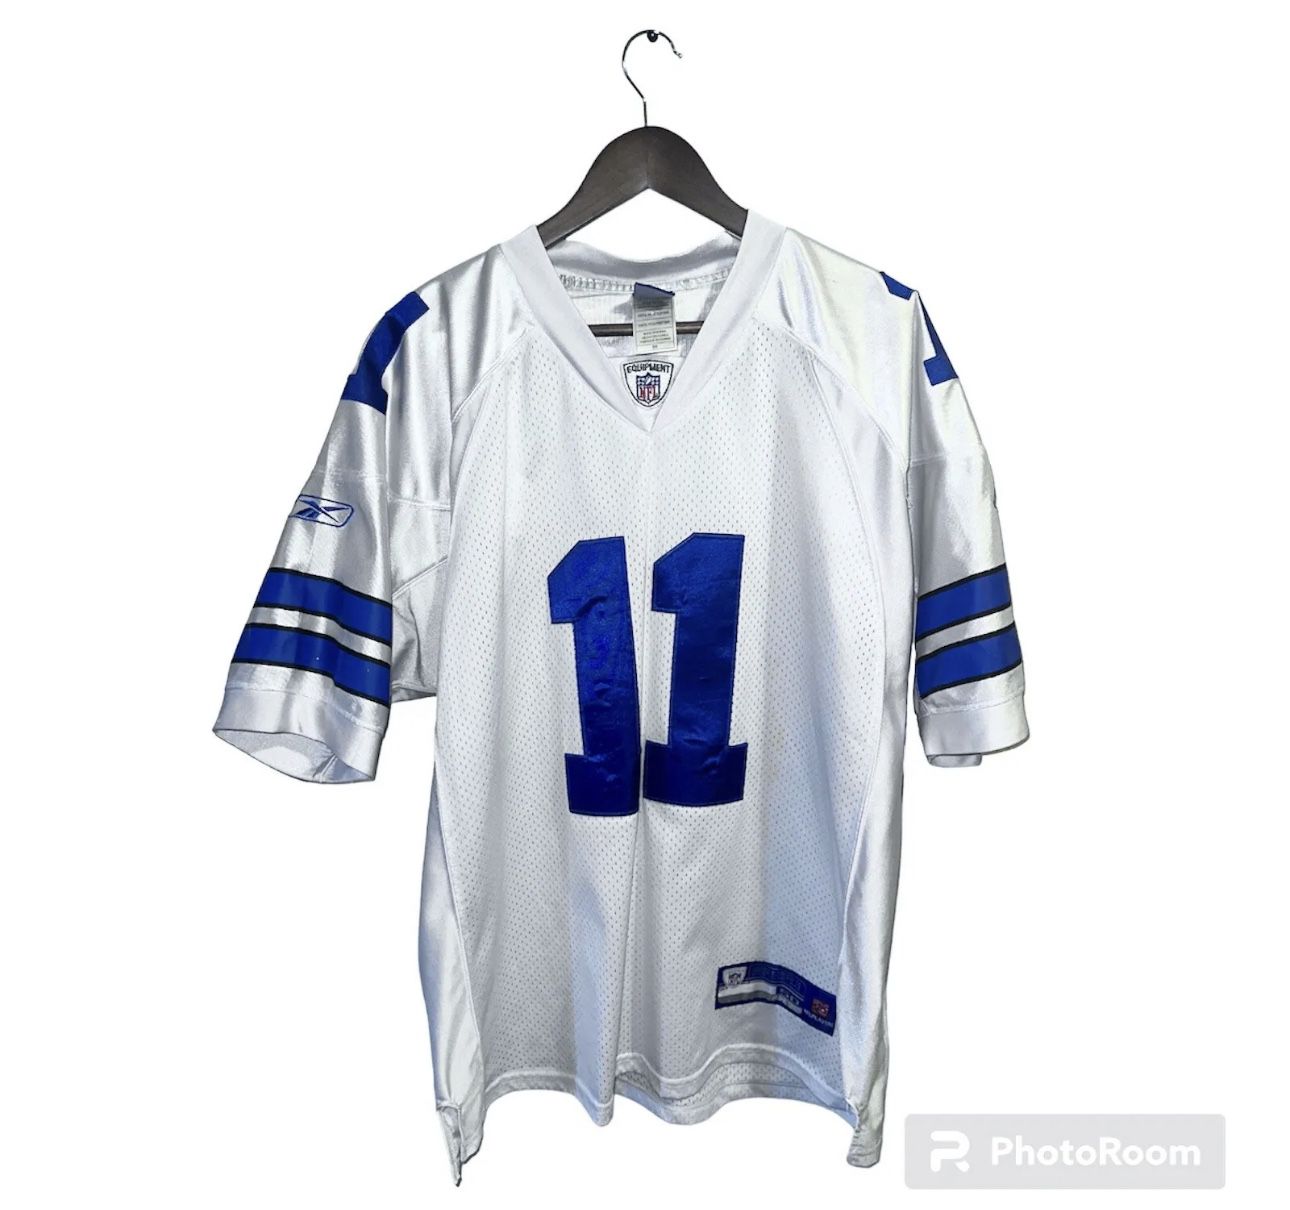 MENS DALLAS COWBOYS NFL JERSEY Roy Eugene Williams Jr. NUMBER 11 SIZE 50  REEBOK for Sale in San Antonio, TX - OfferUp